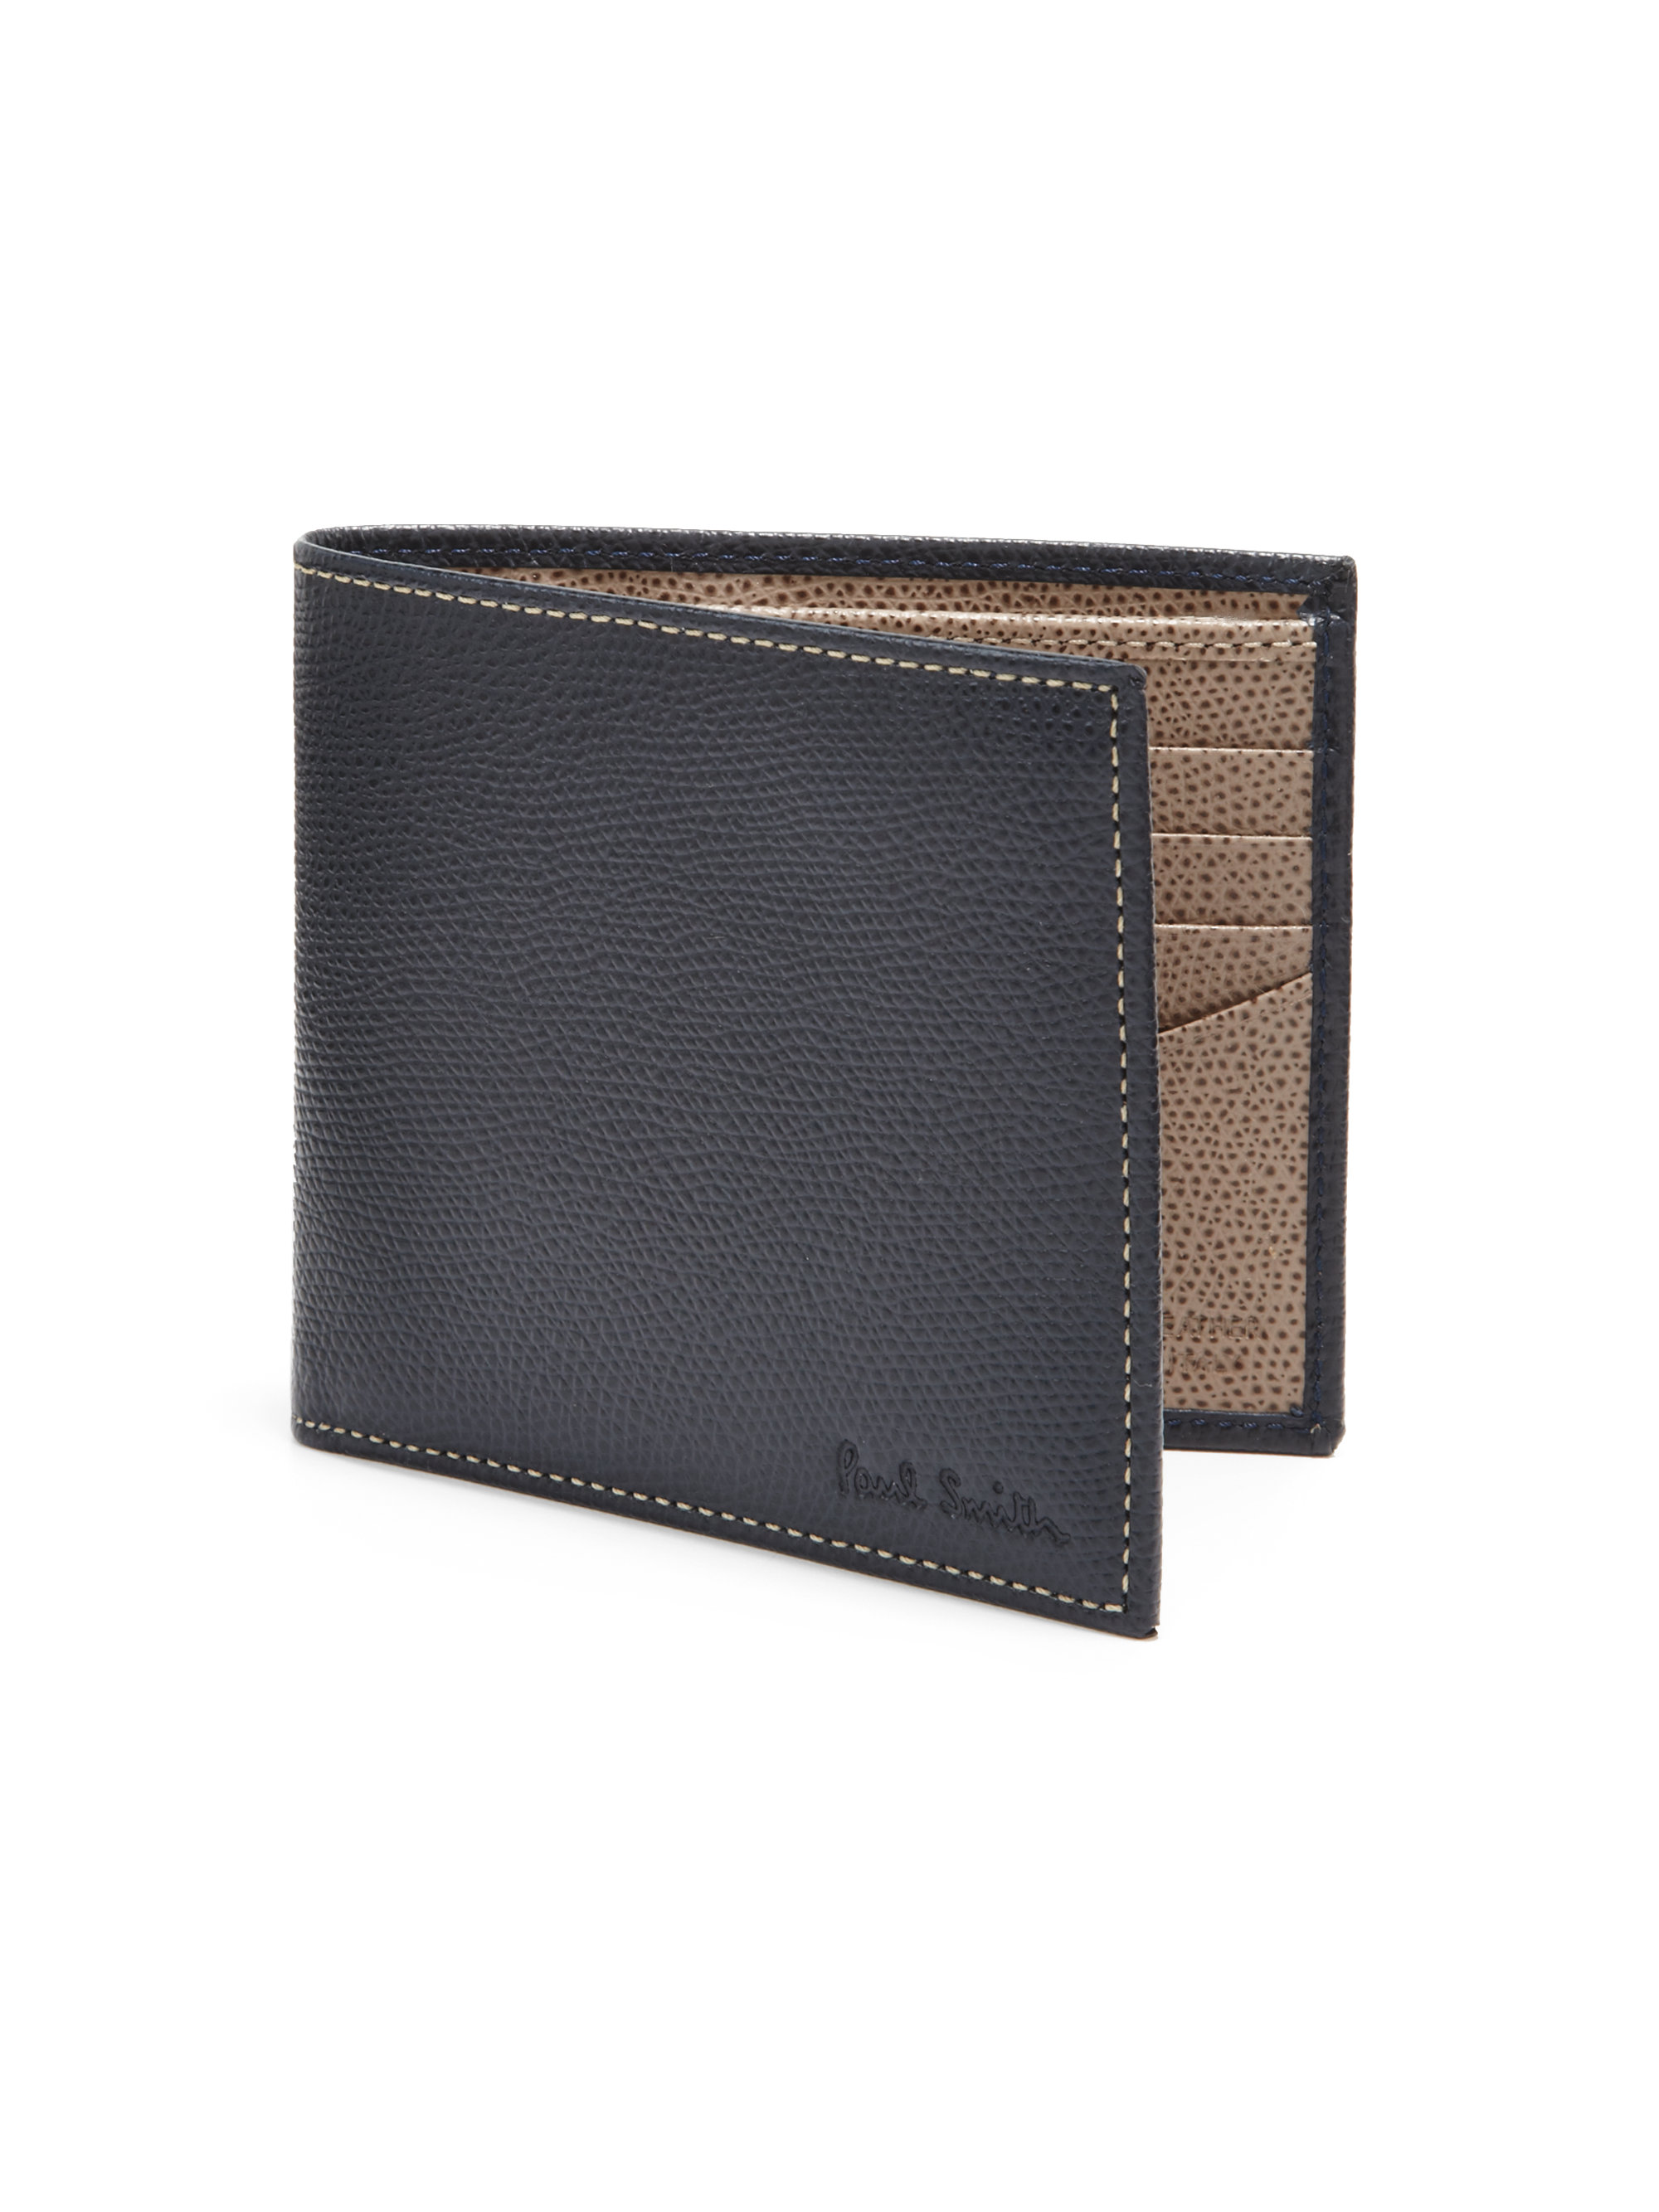 Paul Smith Leather Billfold Wallet in Blue for Men (NAVY-BROWN) | Lyst